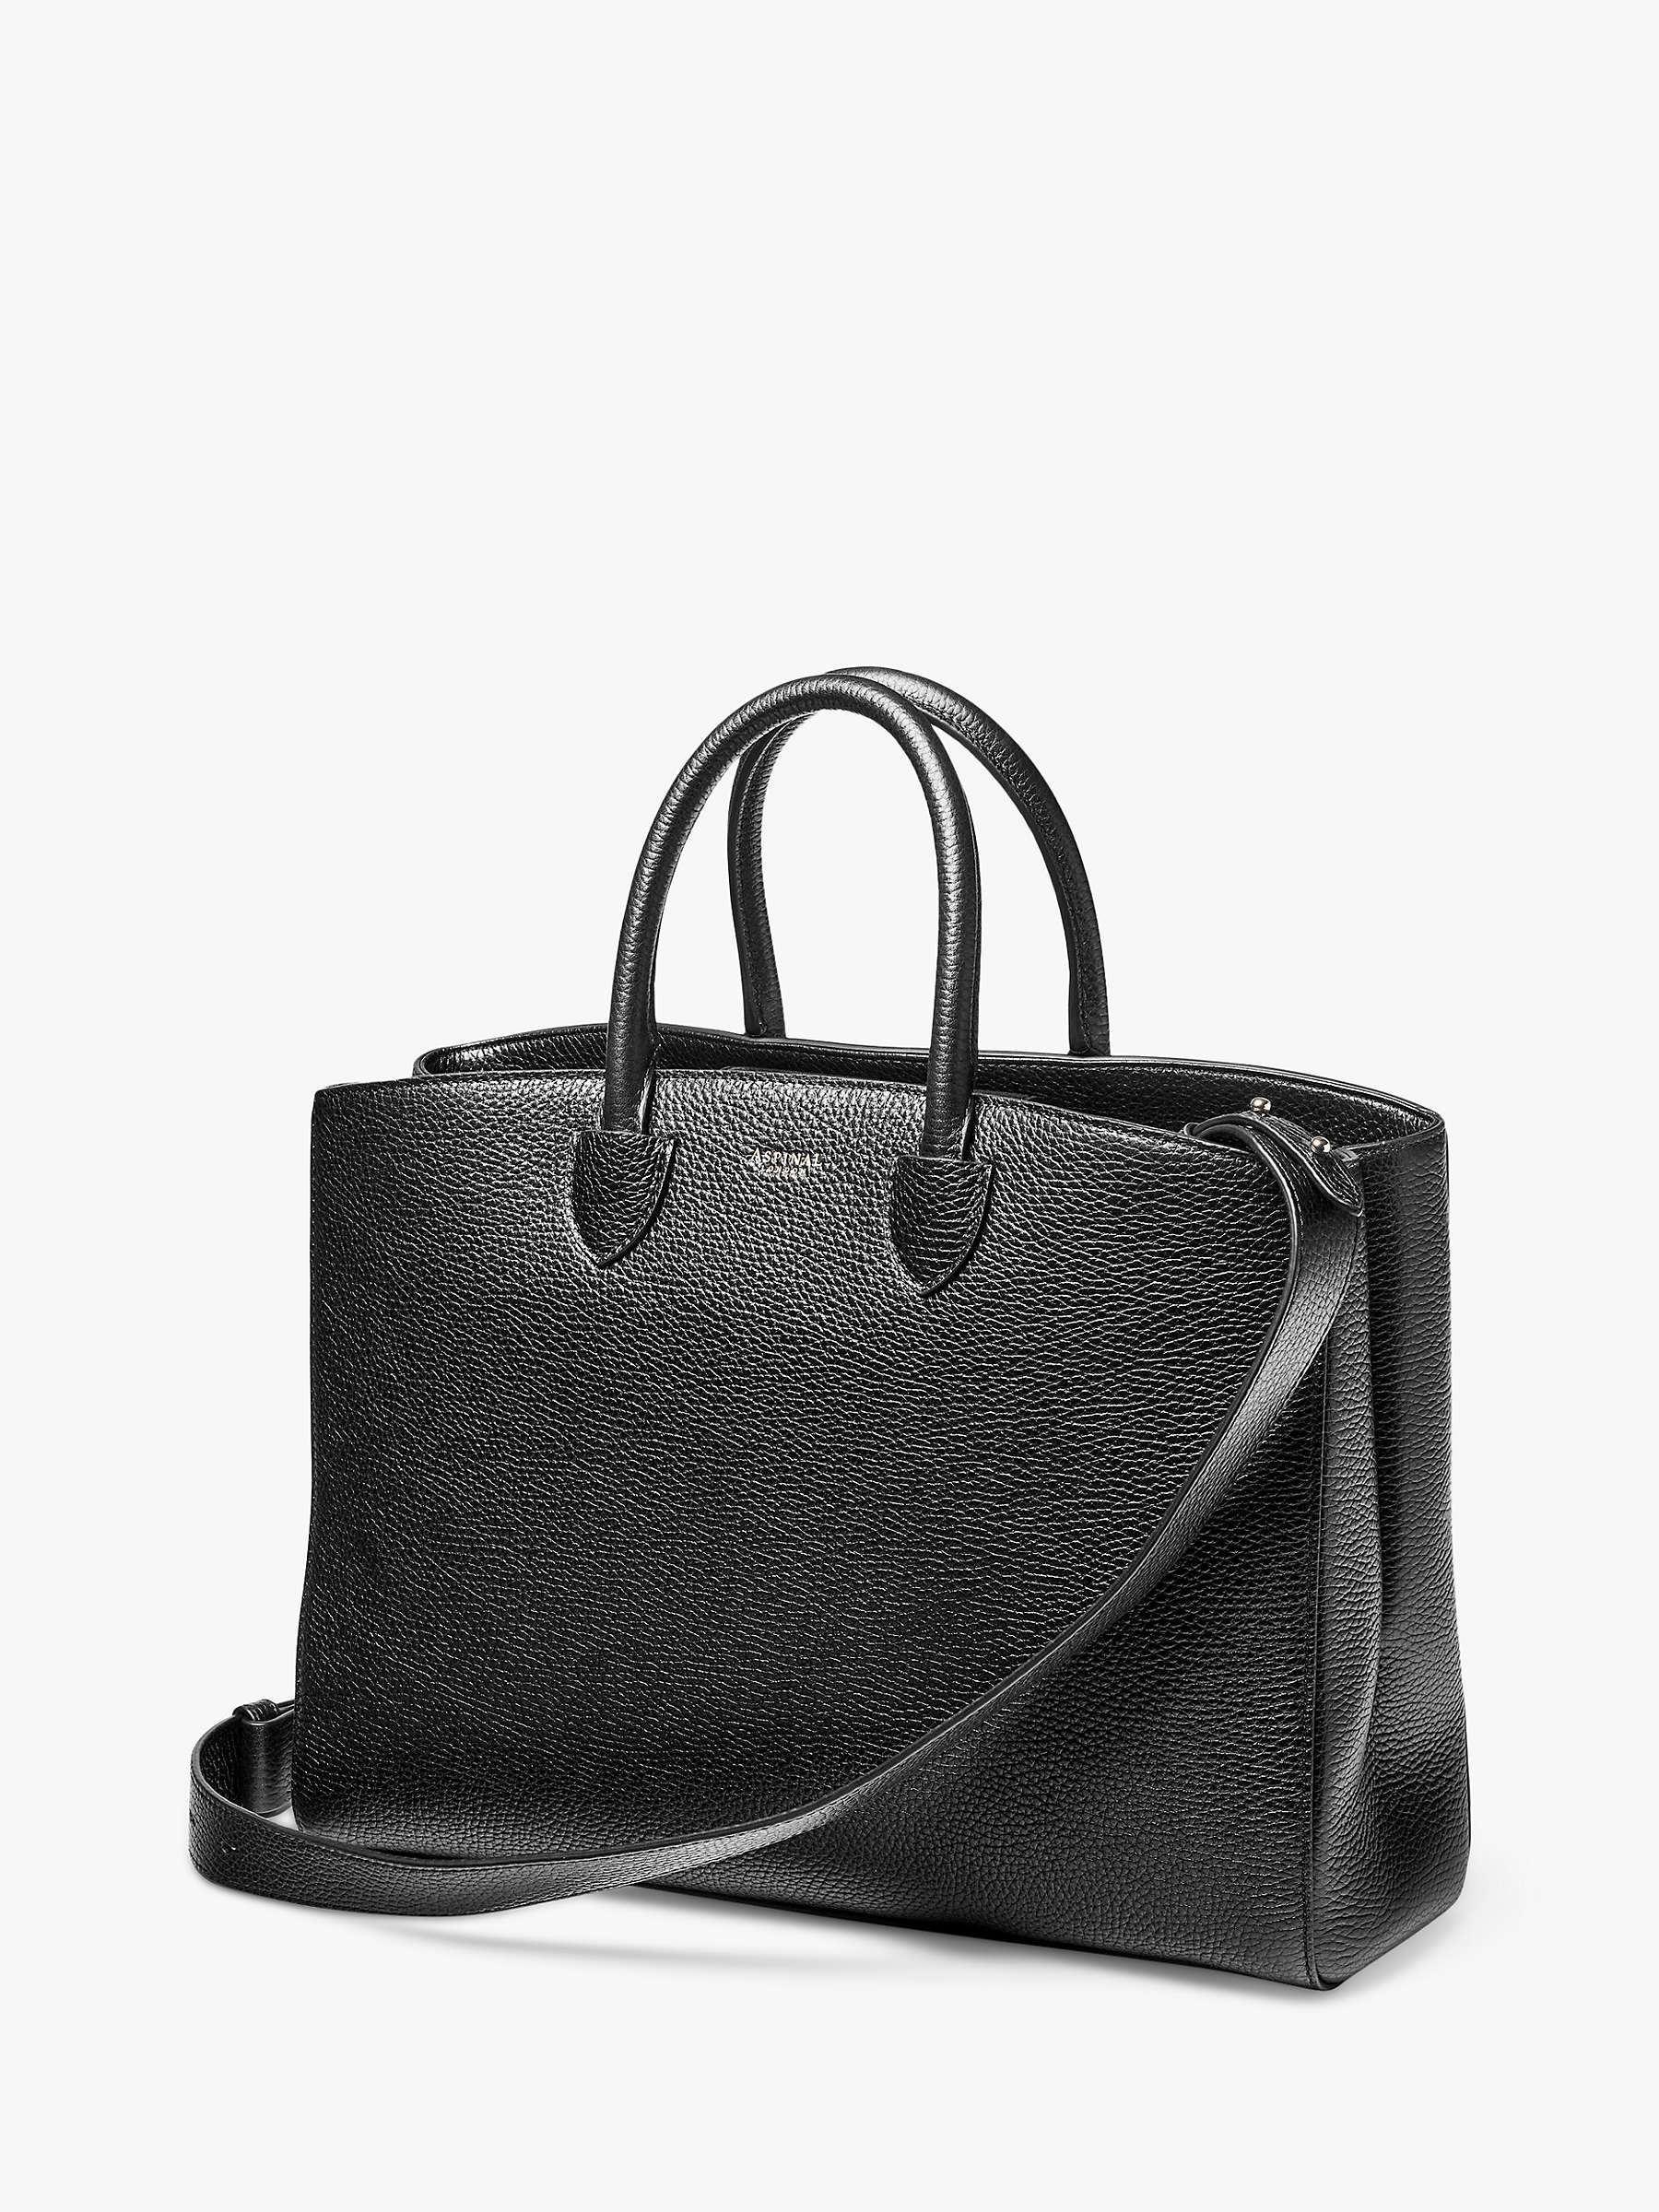 Buy Aspinal of London Madison Pebble Leather Tote Bag Online at johnlewis.com